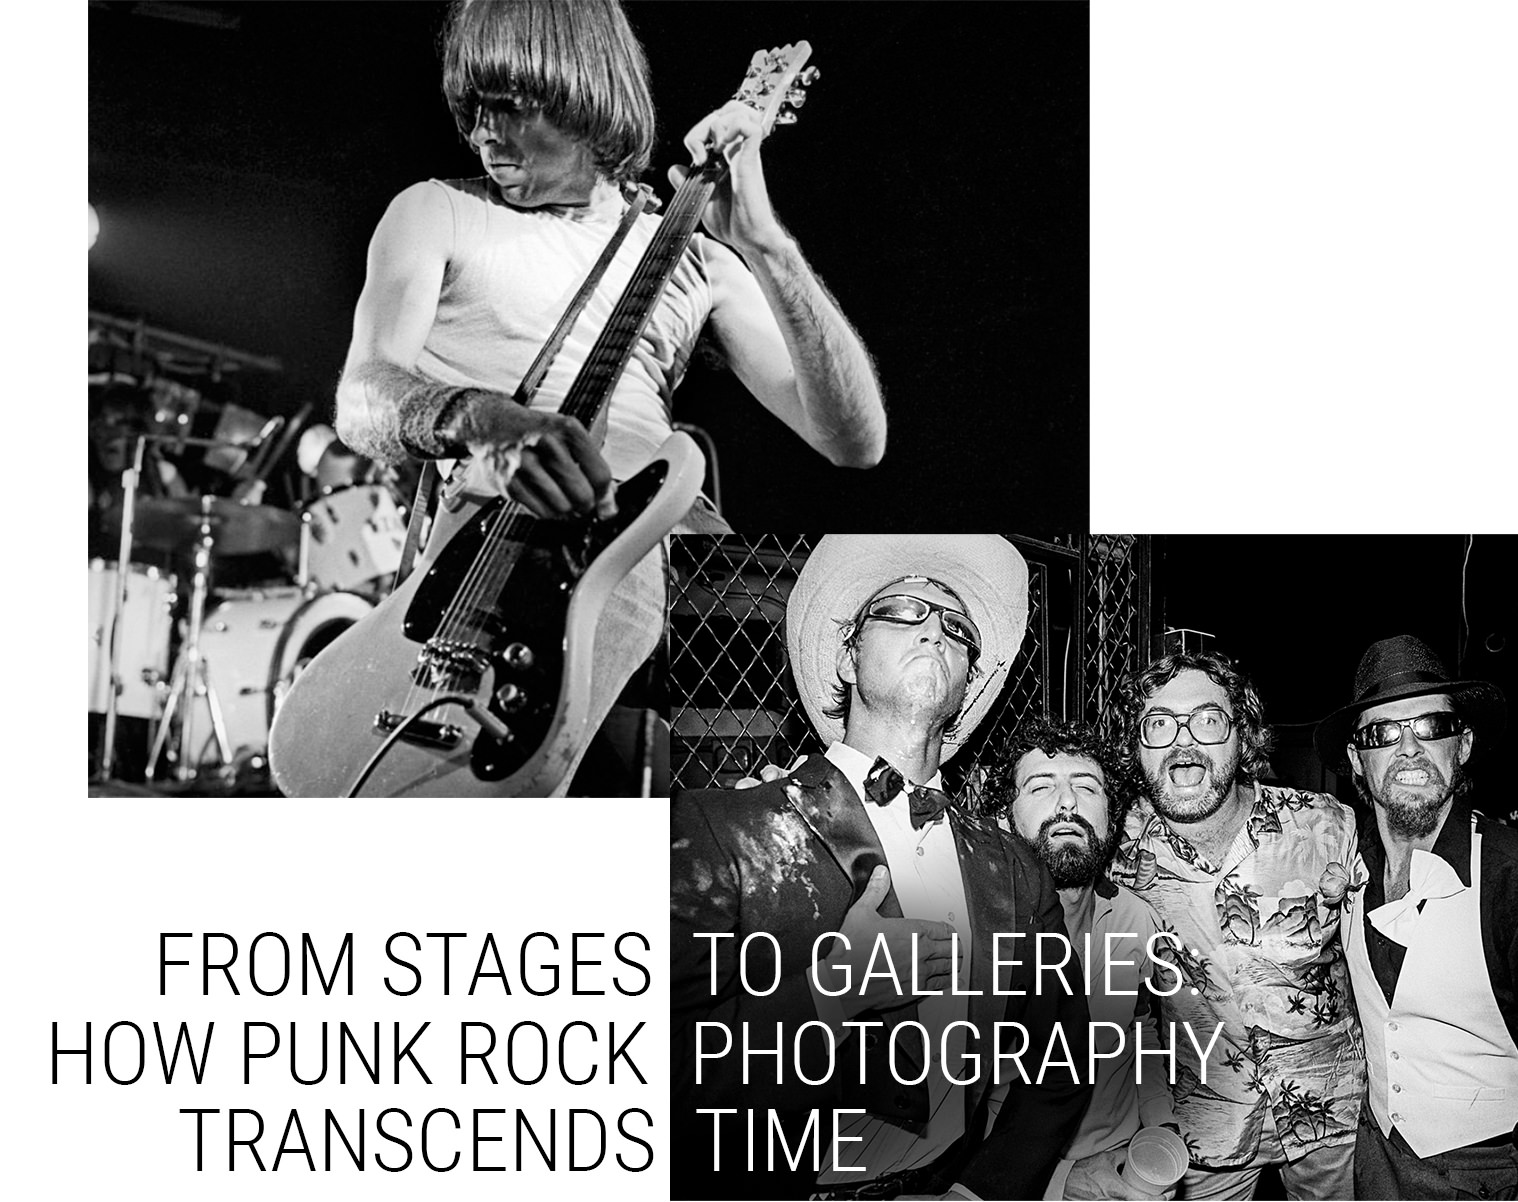 From-Stages-to-Galleries-How-Punk-Rock-Photography-Transcends-Time-header-3.jpg